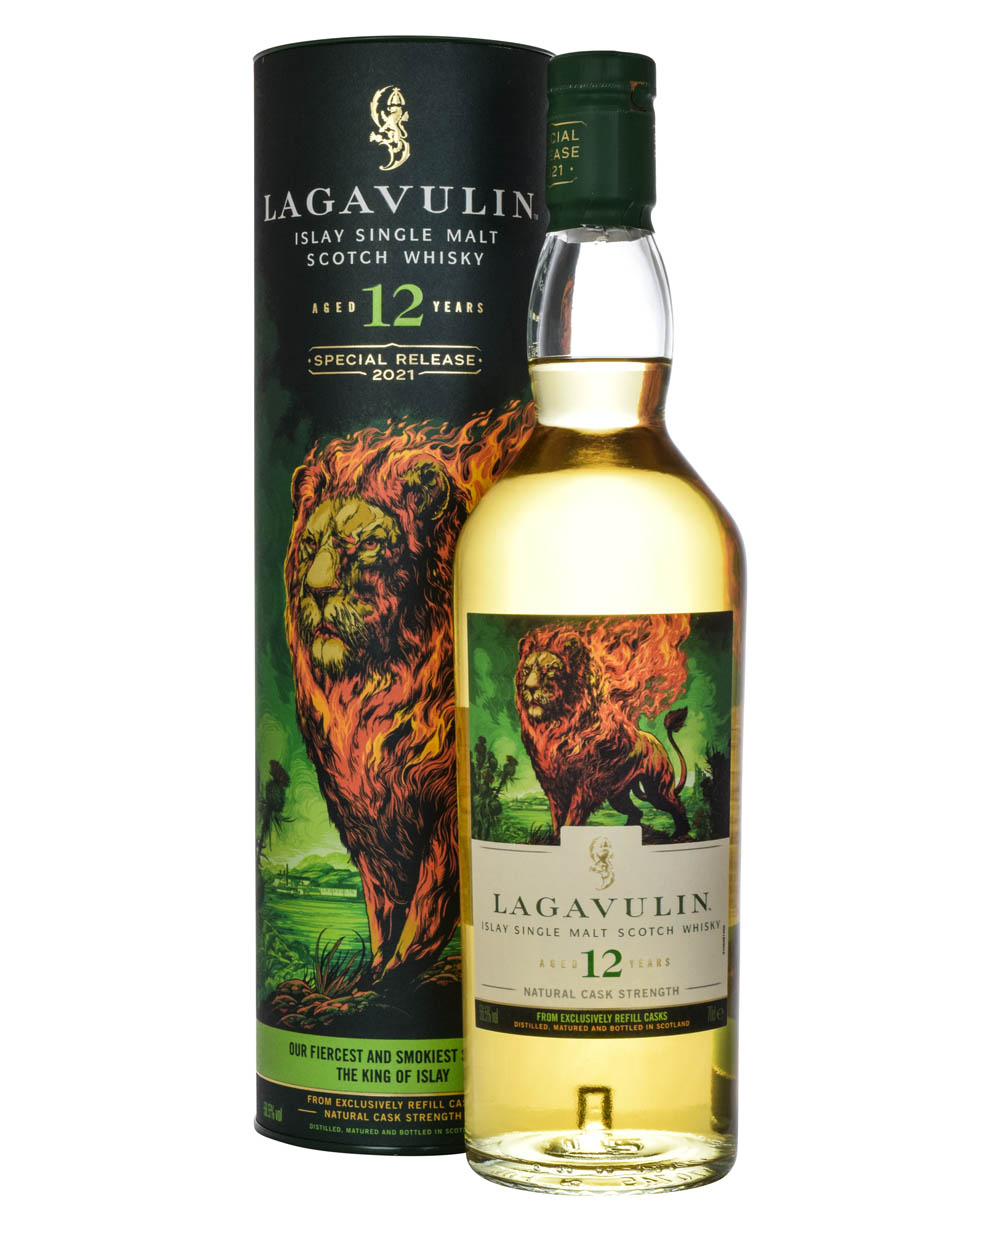 Lagavulin 12 Years Old Diageo Special Release 2021 Box Must Have Malts